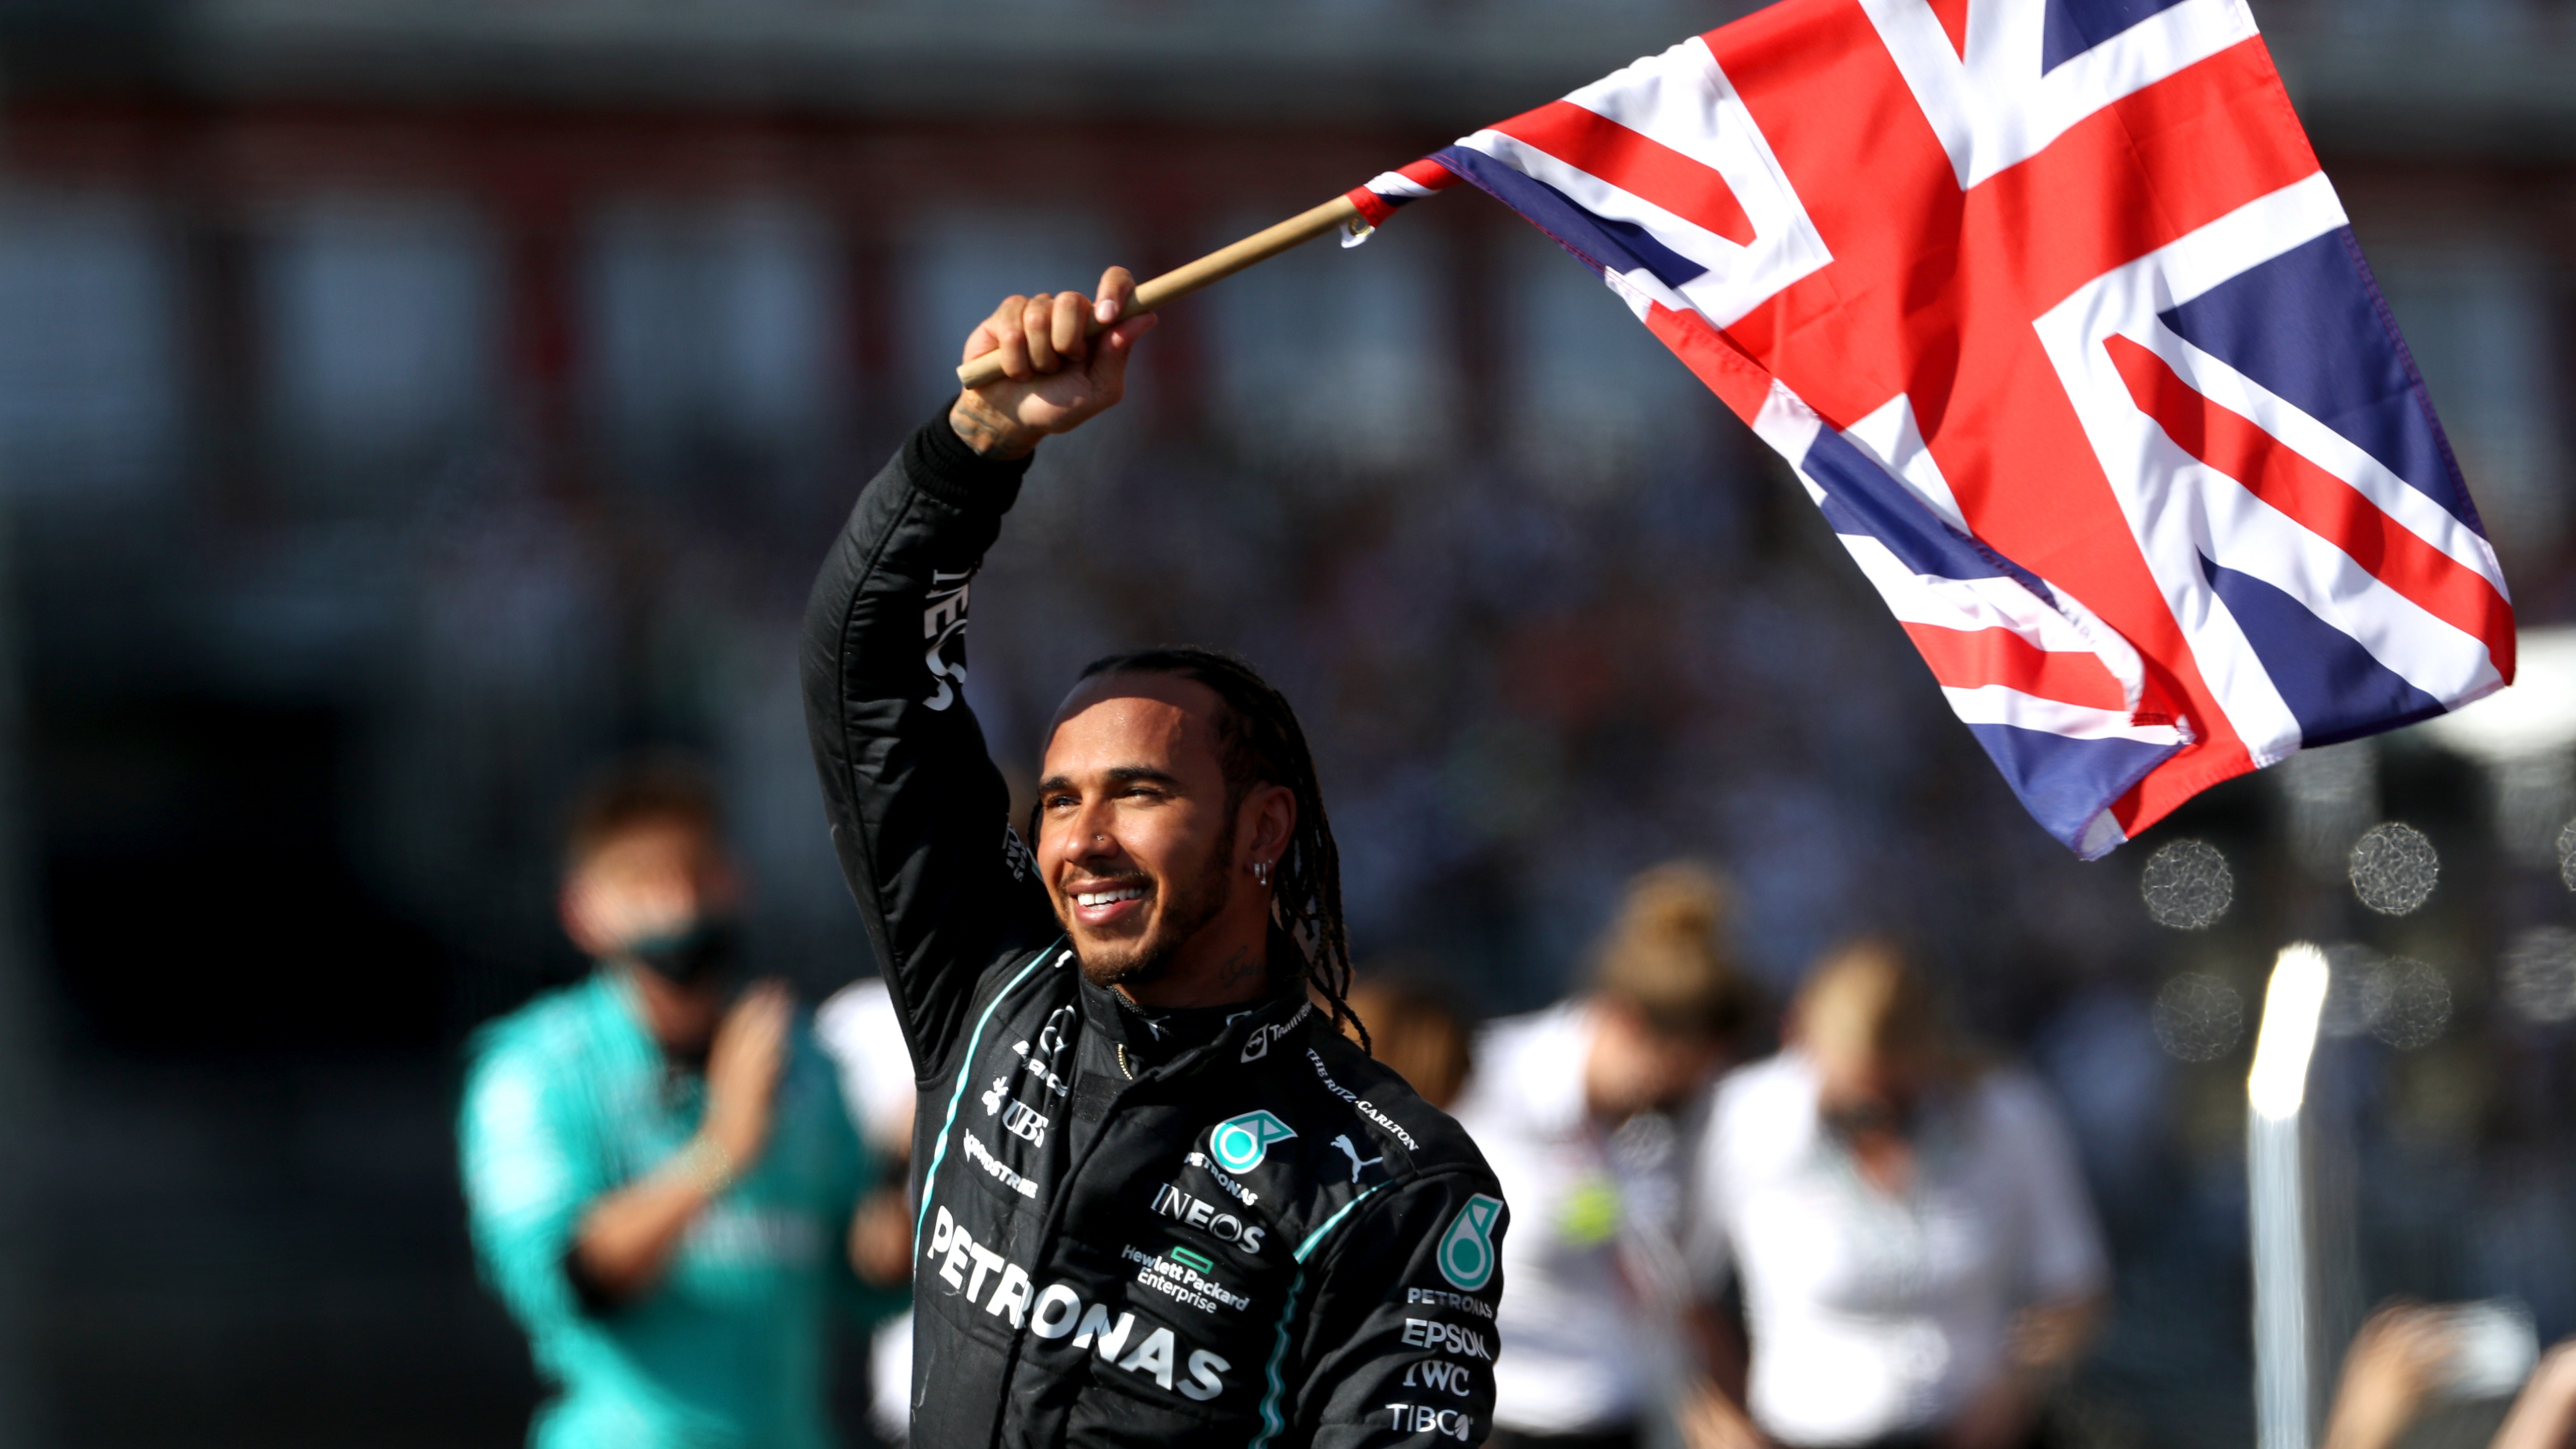 Lewis Hamilton wins British Grand Prix after controversial crash with